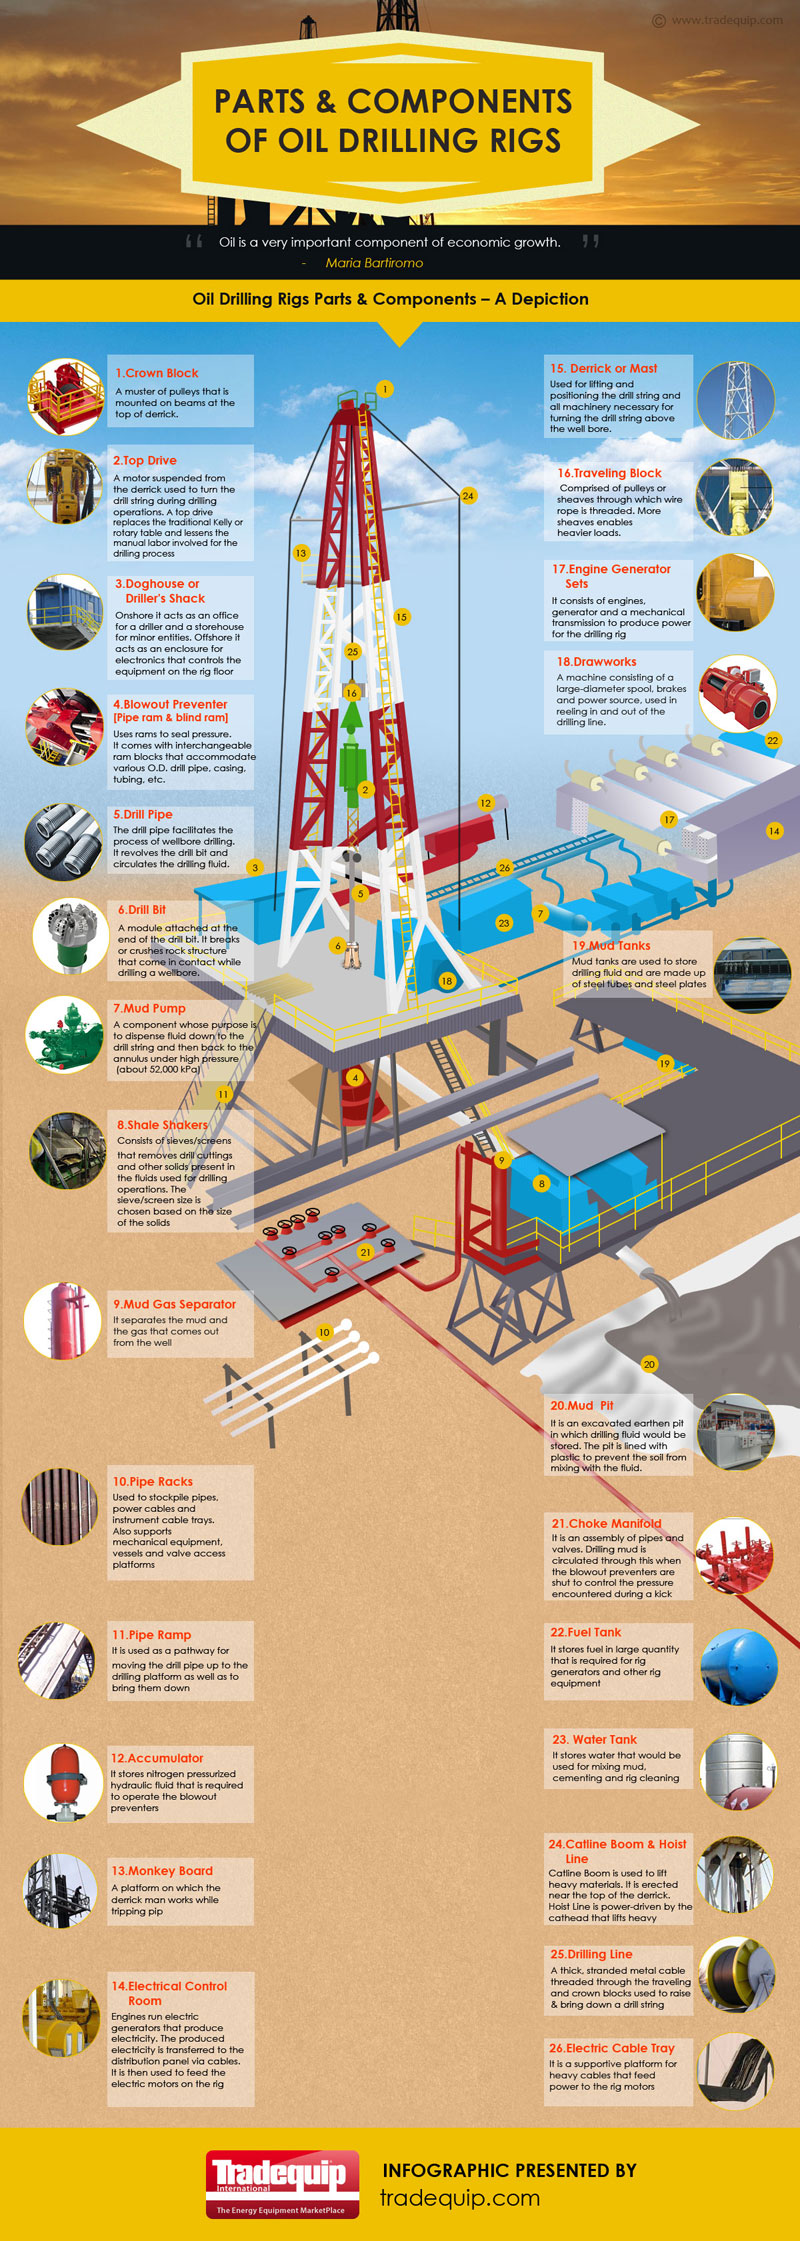 Parts And Components Of Oil Drilling Rigs #infographic